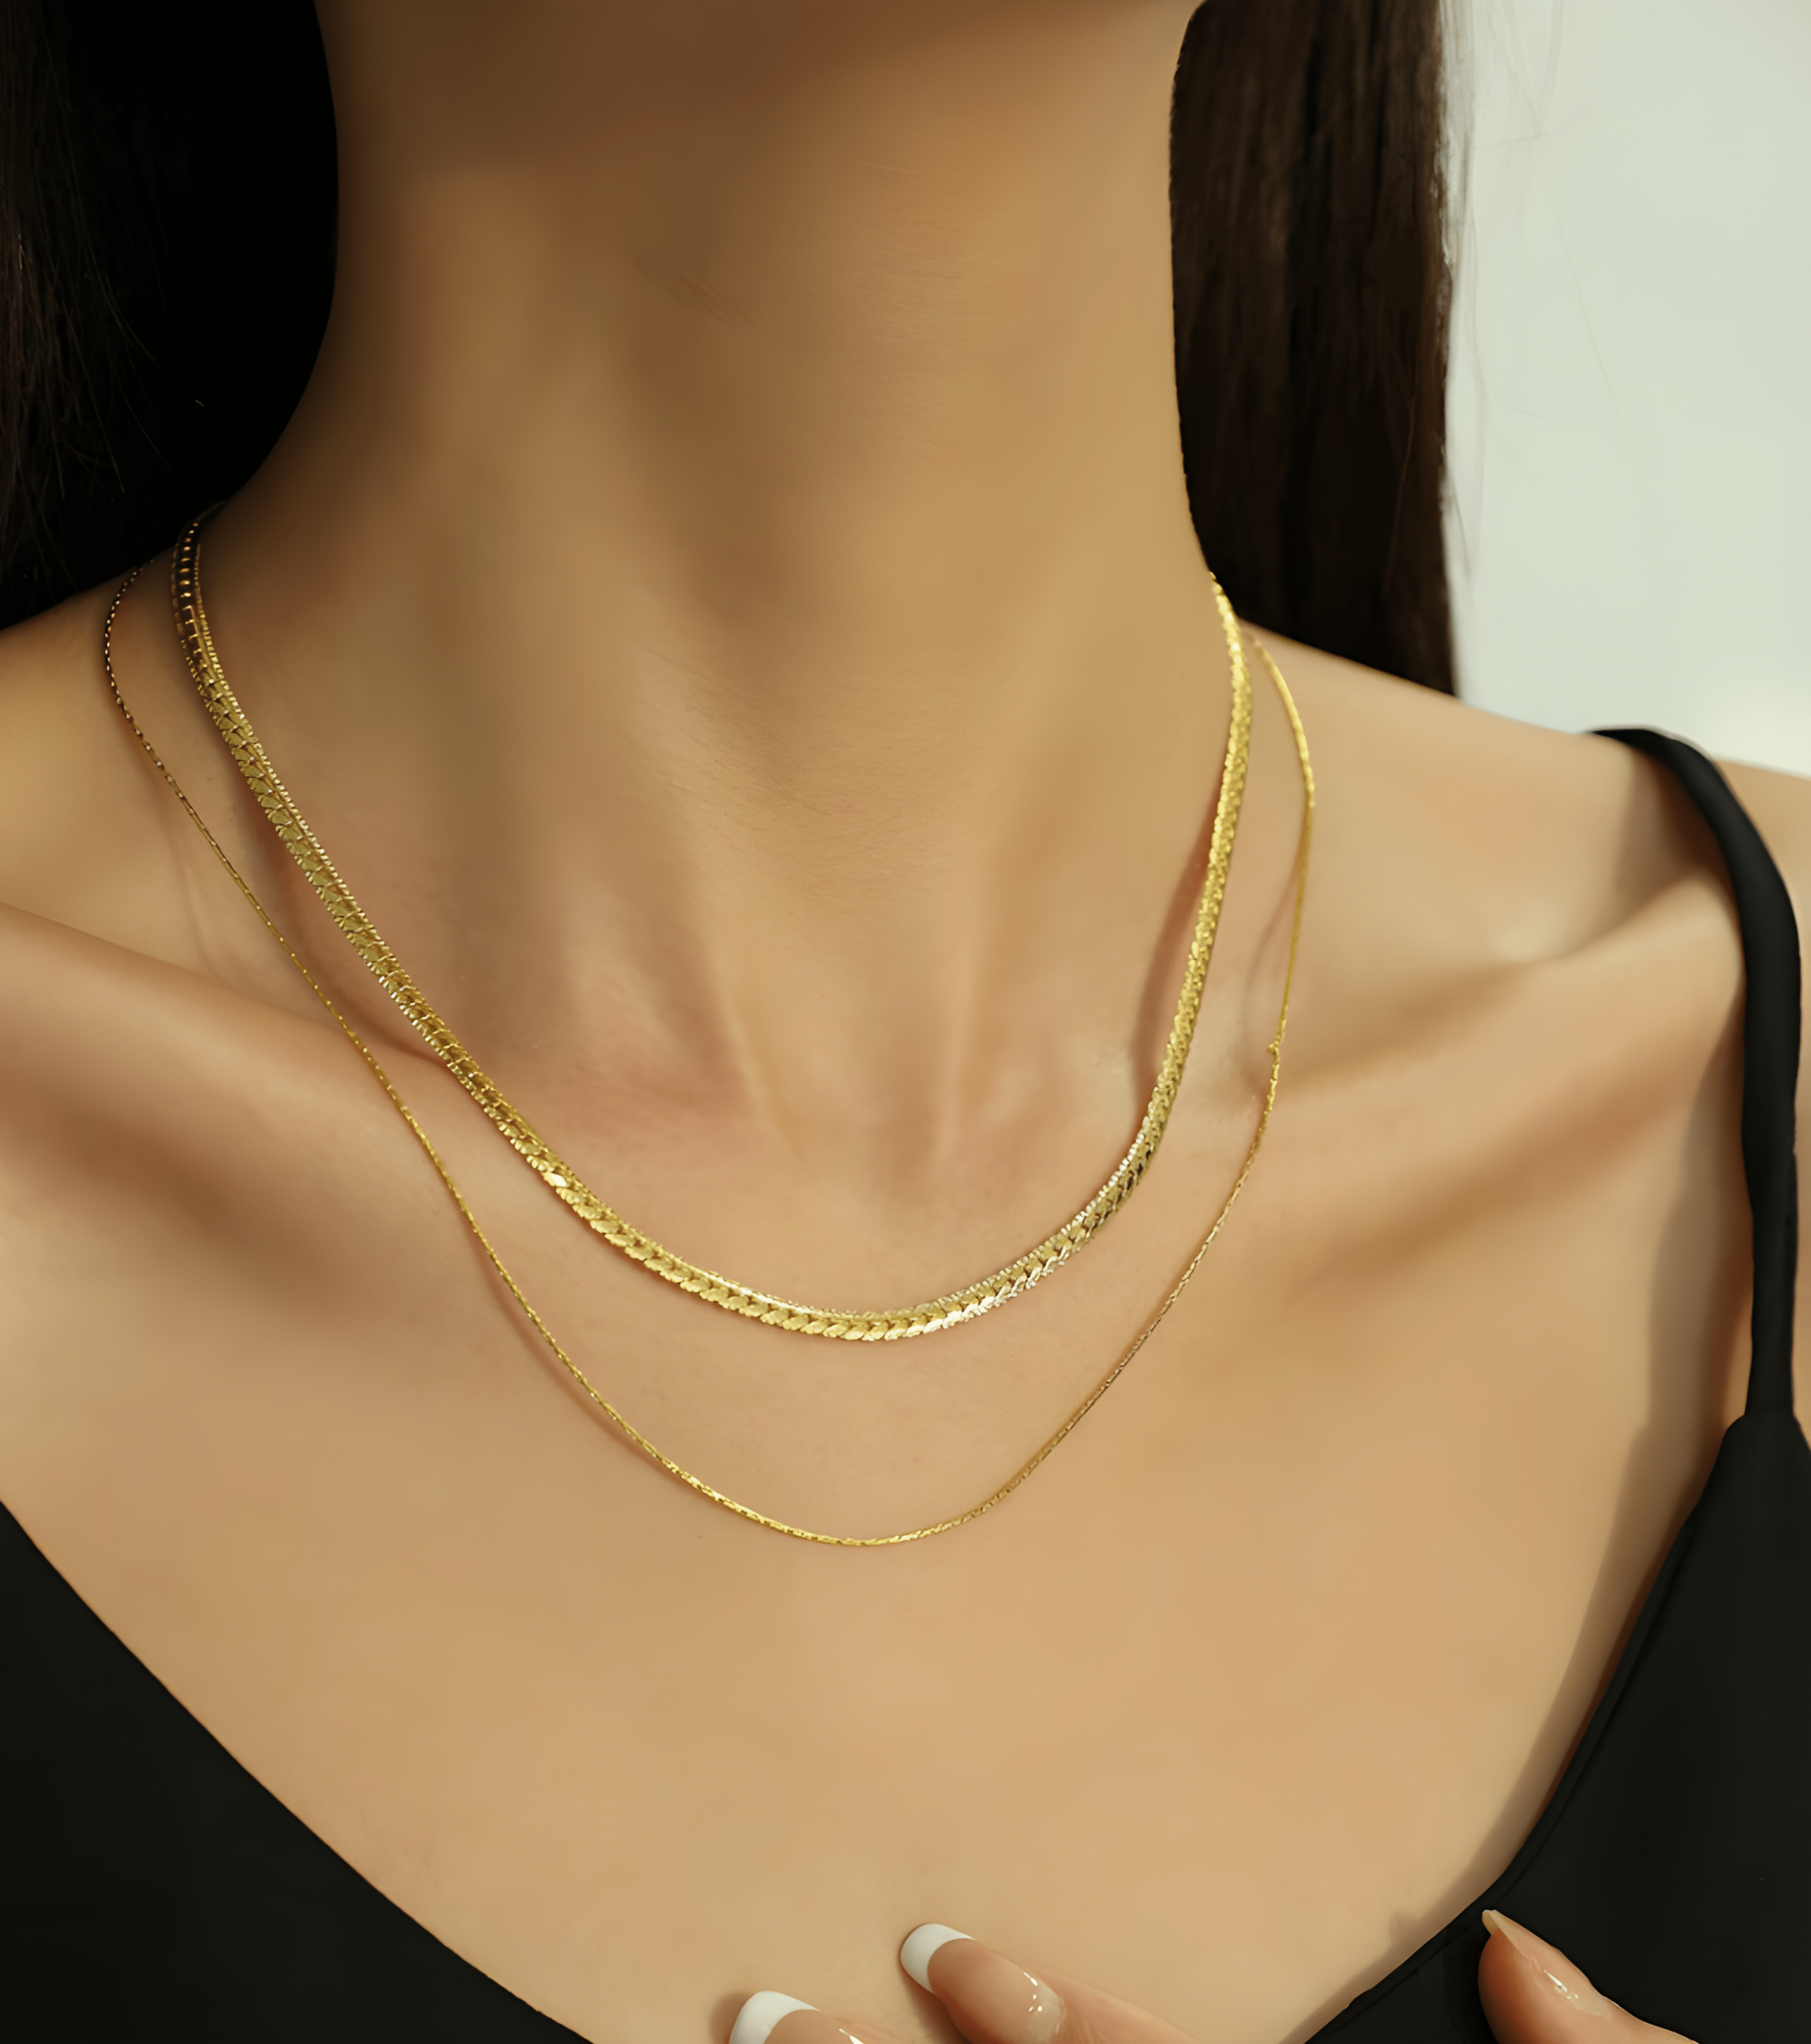 Buy 18 K Gold Snake Chain / Gold Choker / High Quality Flat Snake Chain / Gold  Necklace / 925 Sterling Silver / Gold Chain / Christmas Gift Online in  India - Etsy